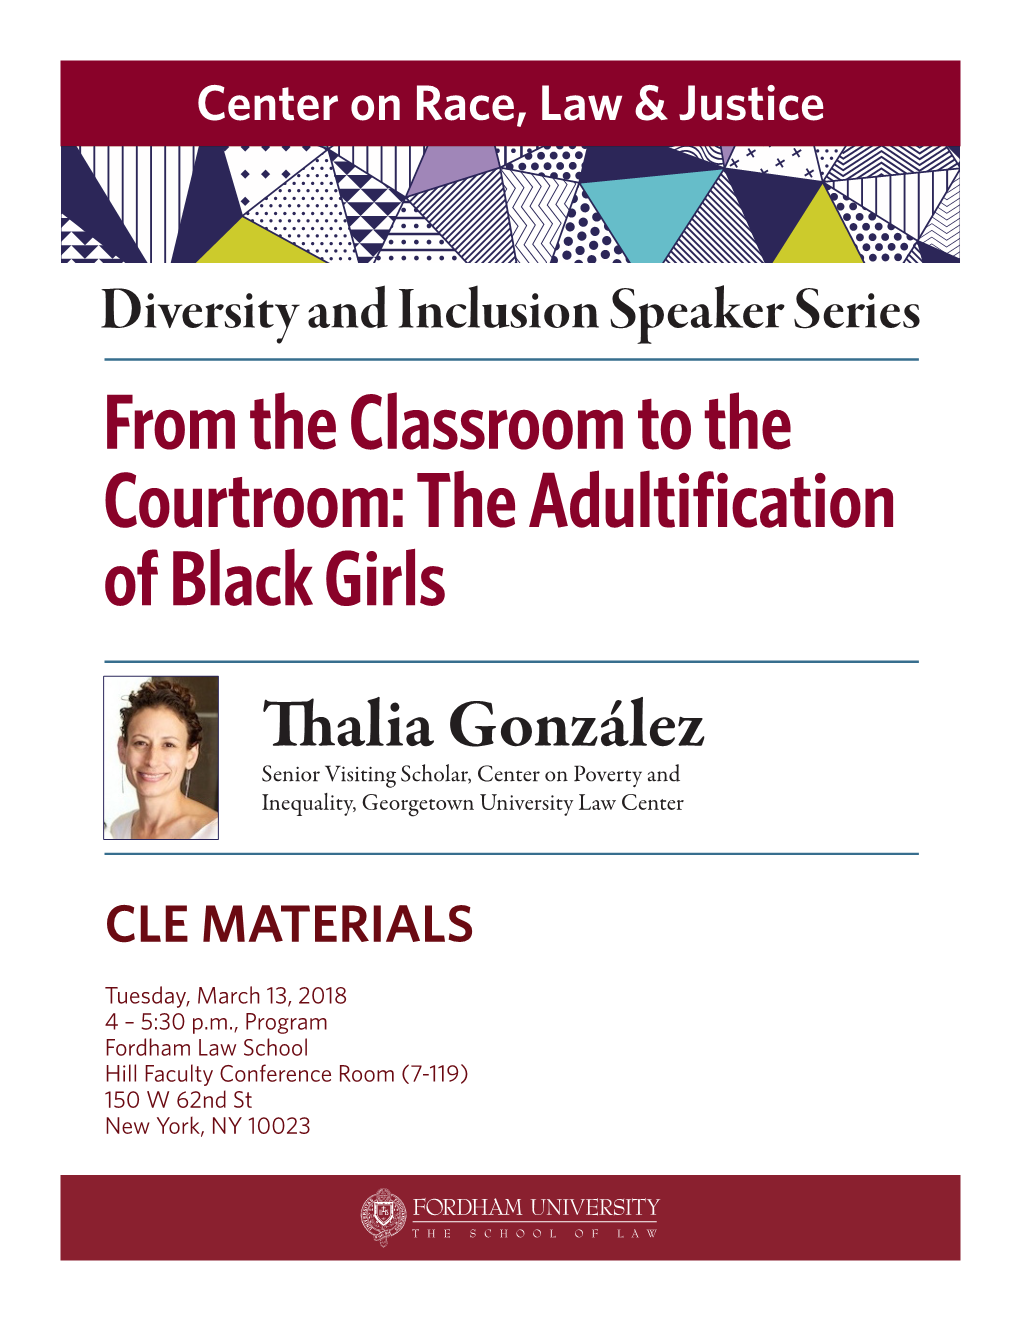 The Adultification of Black Girls